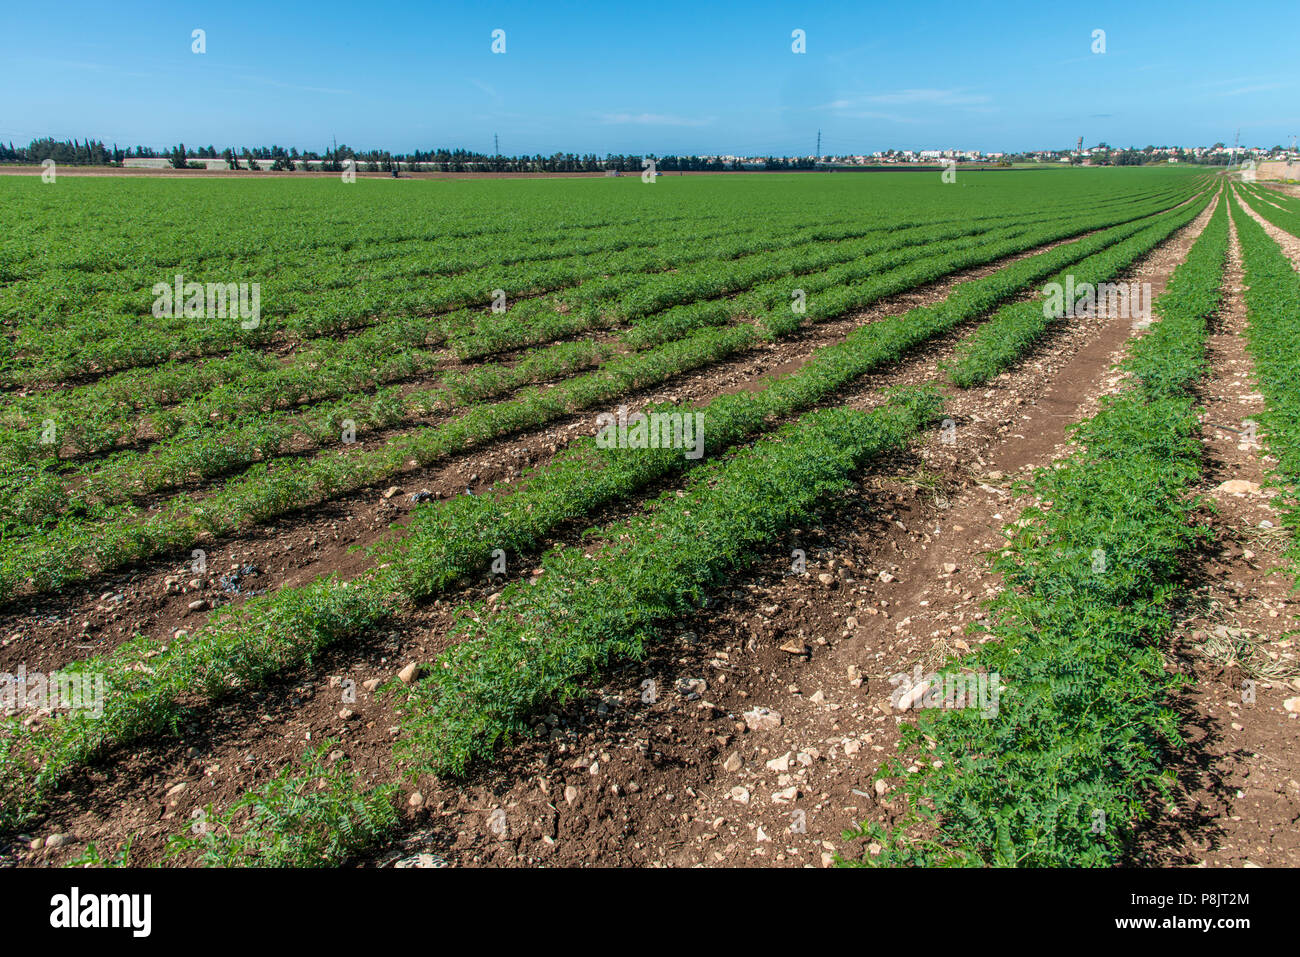 Rows of humus crops in a field Stock Photo